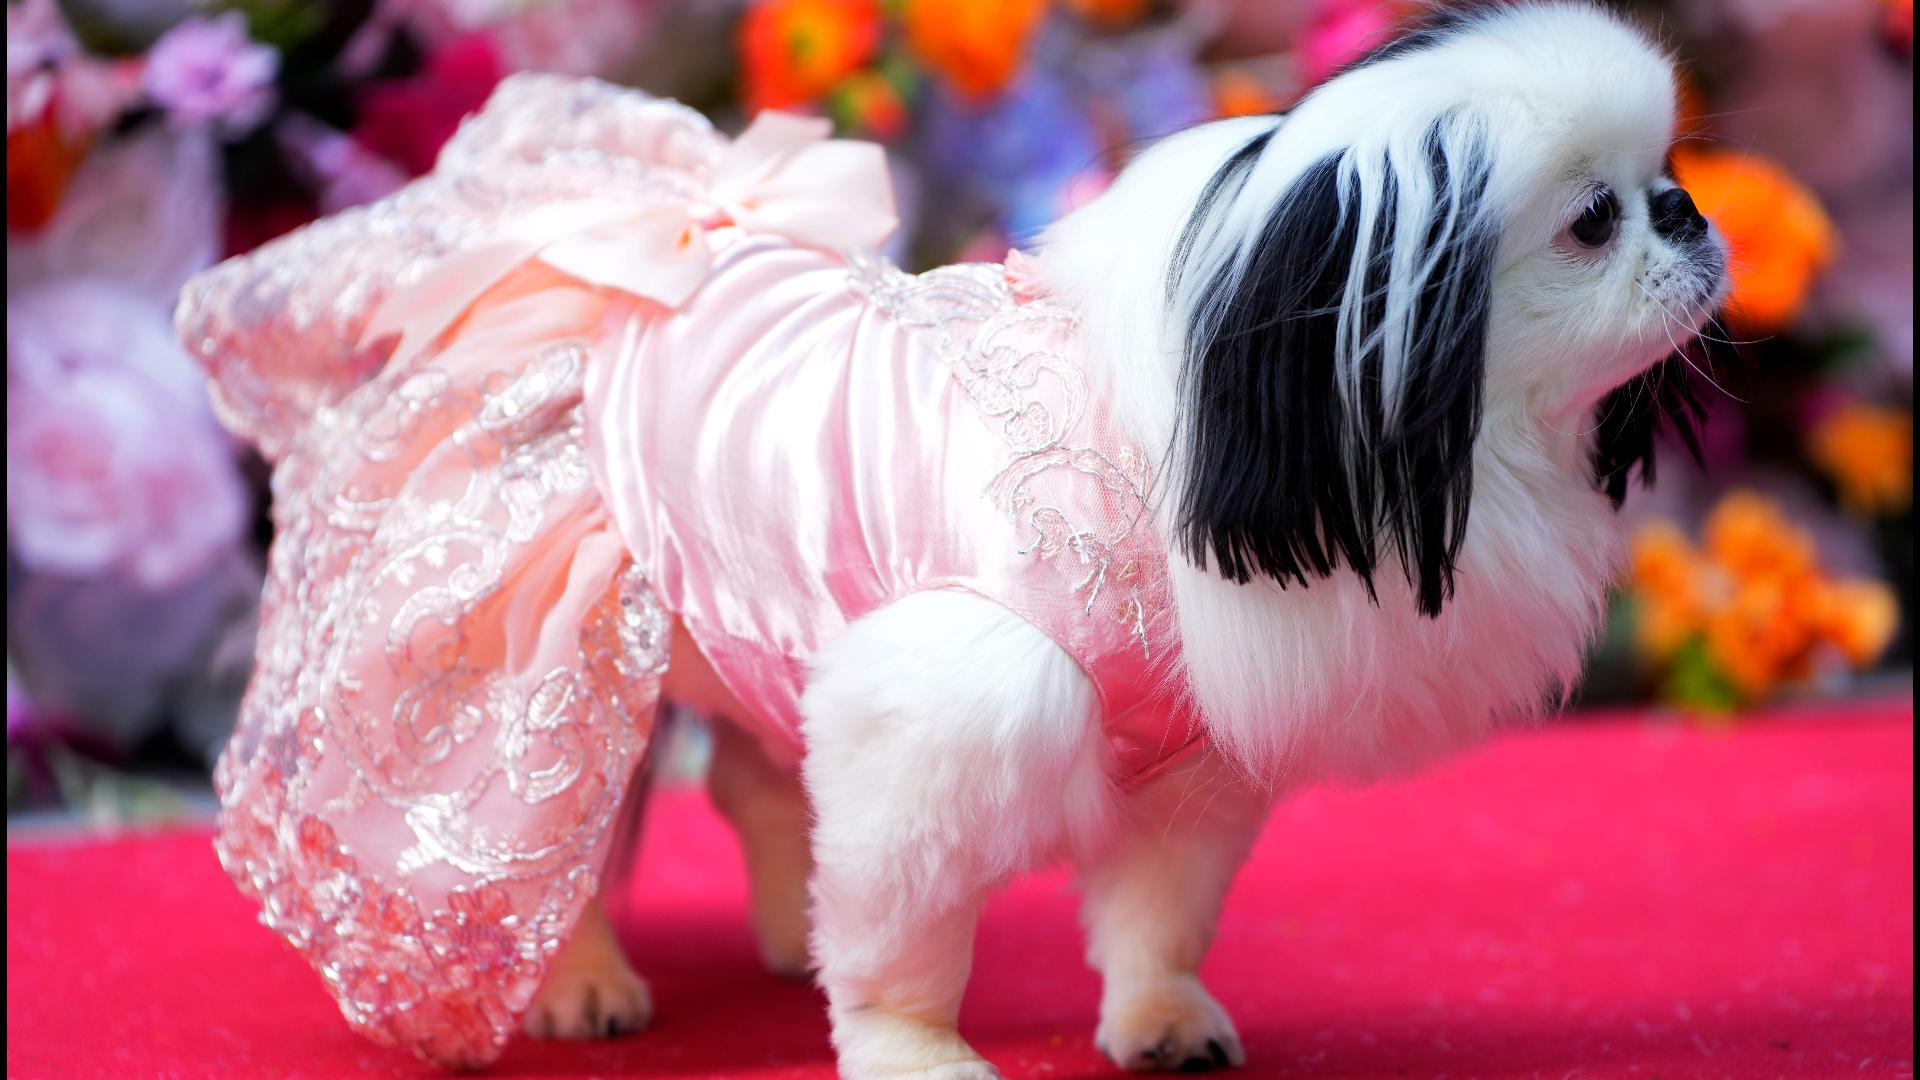 PHOTOS: At the Pet Gala, fashion goes to the dogs | 5newsonline.com